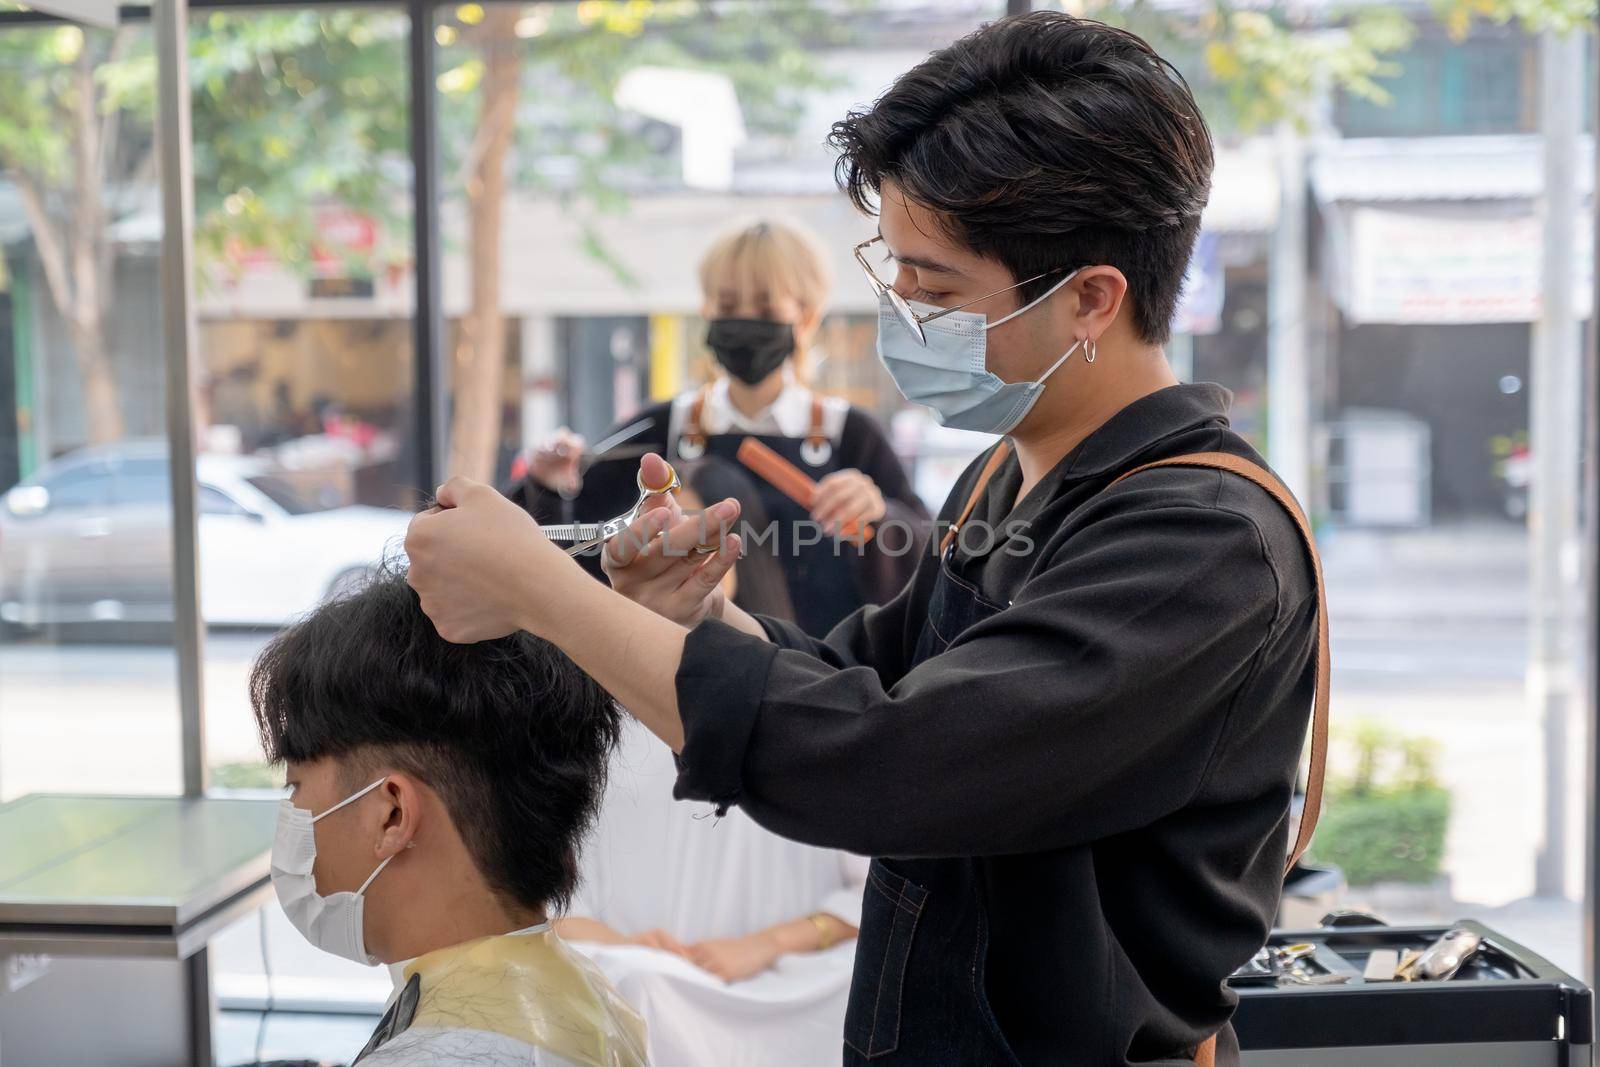 Beauty salon Asian barber man with hygiene mask use scissors cut hair of customer in the shop with other co-worker also take care hair style of woman. Beauty business for good appearance concept.